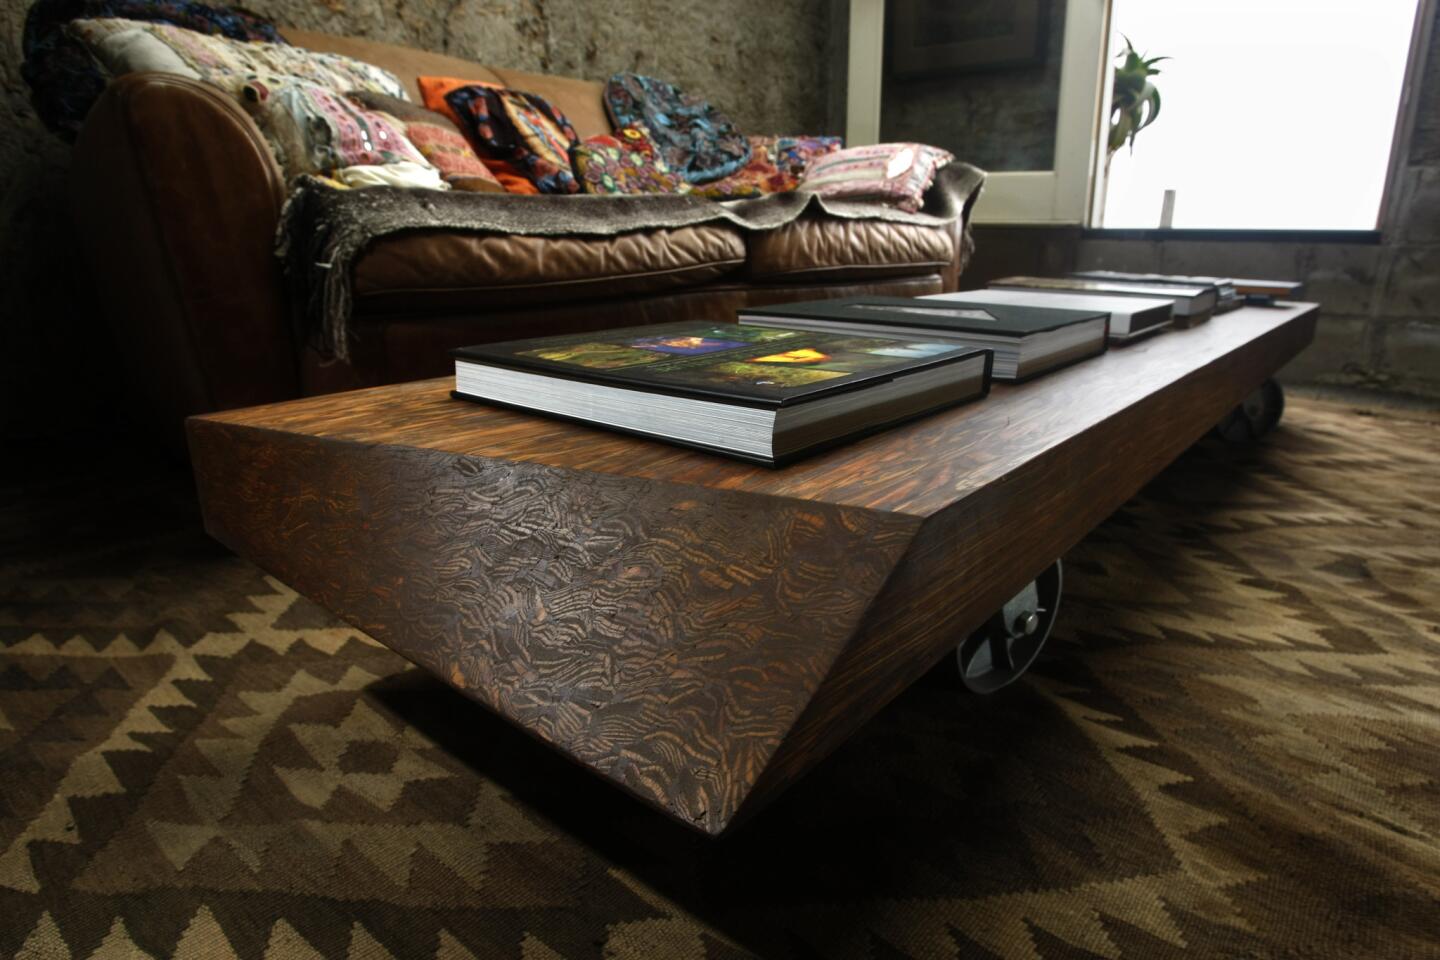 Turrent designed the coffee table, which is made of a pine beam from a warehouse in Los Angeles. "By twisting the geometry of the piece, you can see it's different textures," she said.